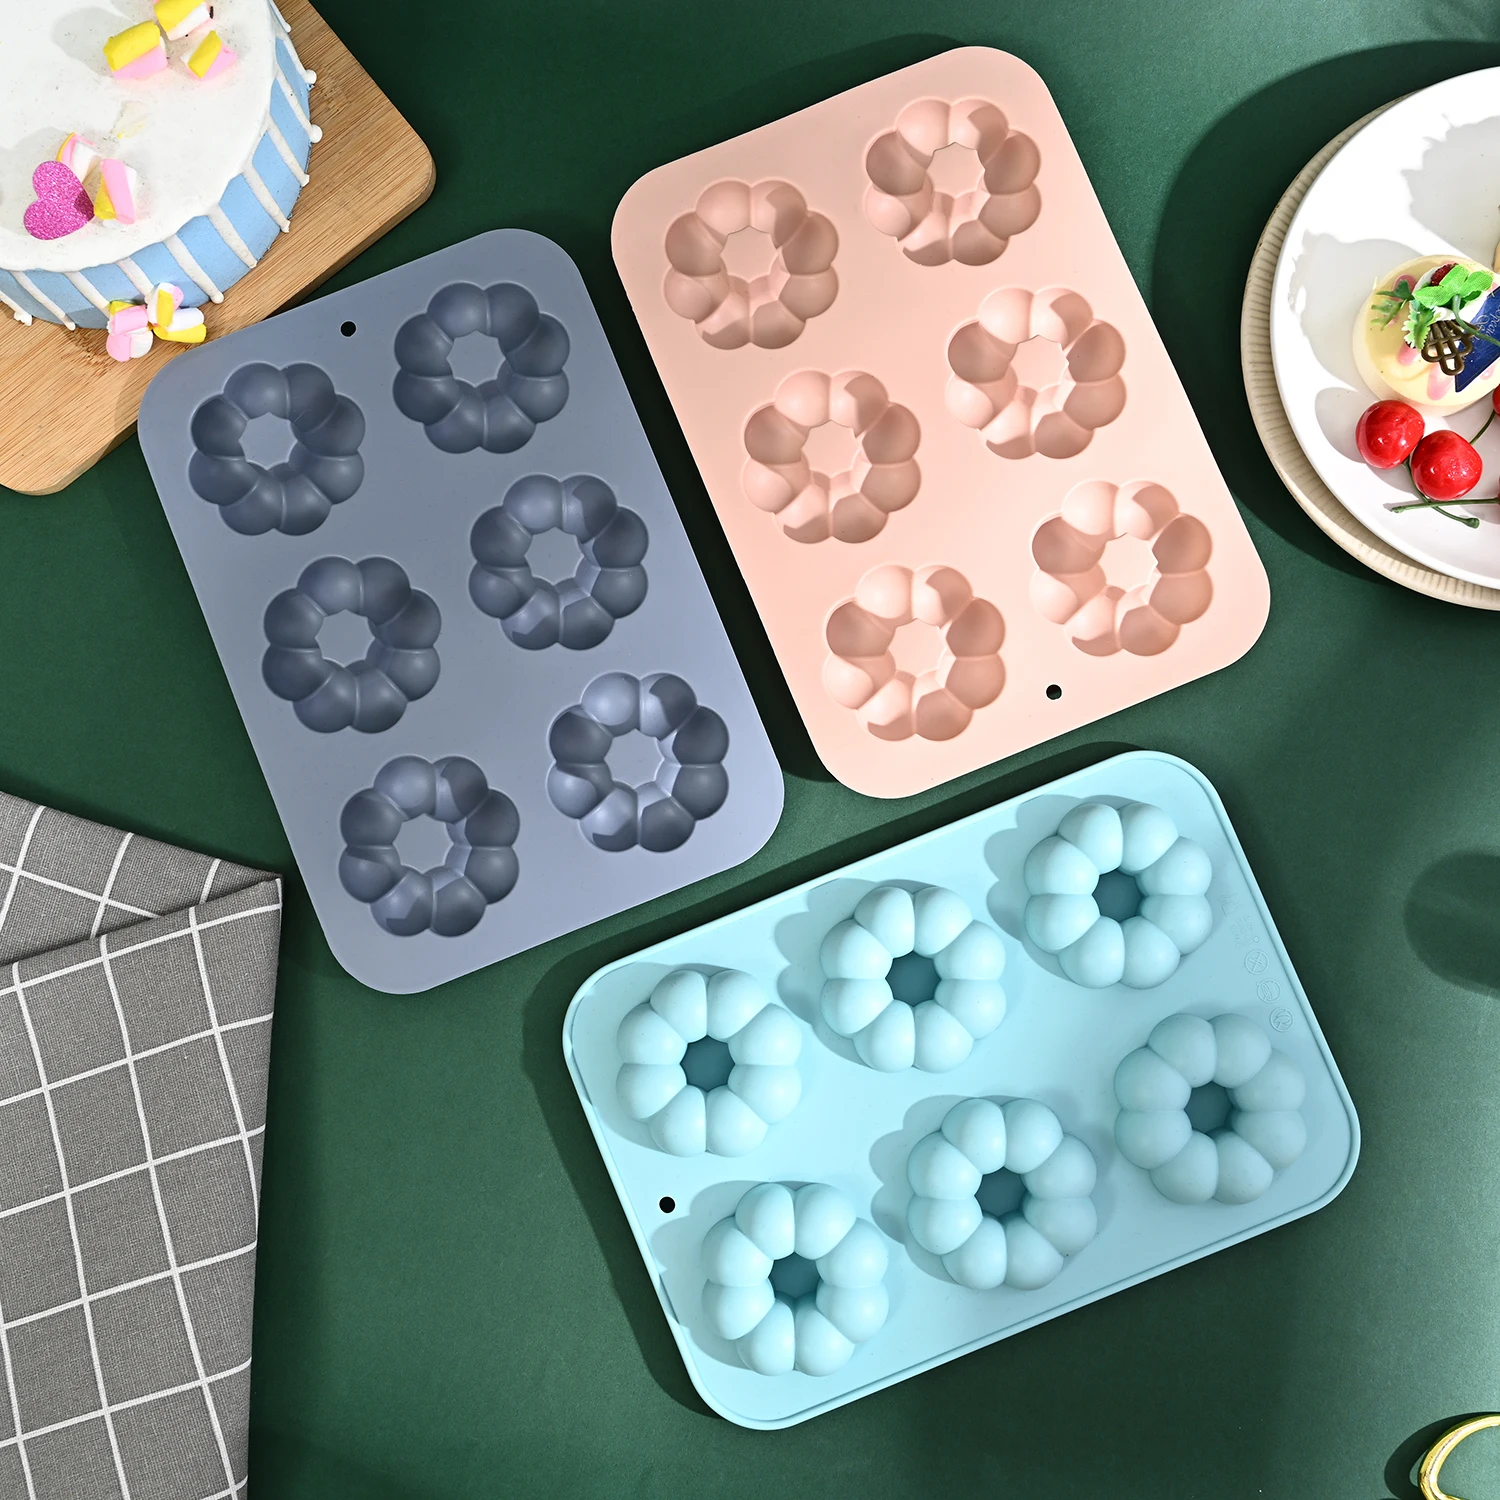 6 Cavity Non Stick Biscuit Cake Mould Reusable Chocolate Making Tray Silicone Doughnut Pan For Baking Pan Para Hacer Rosquil